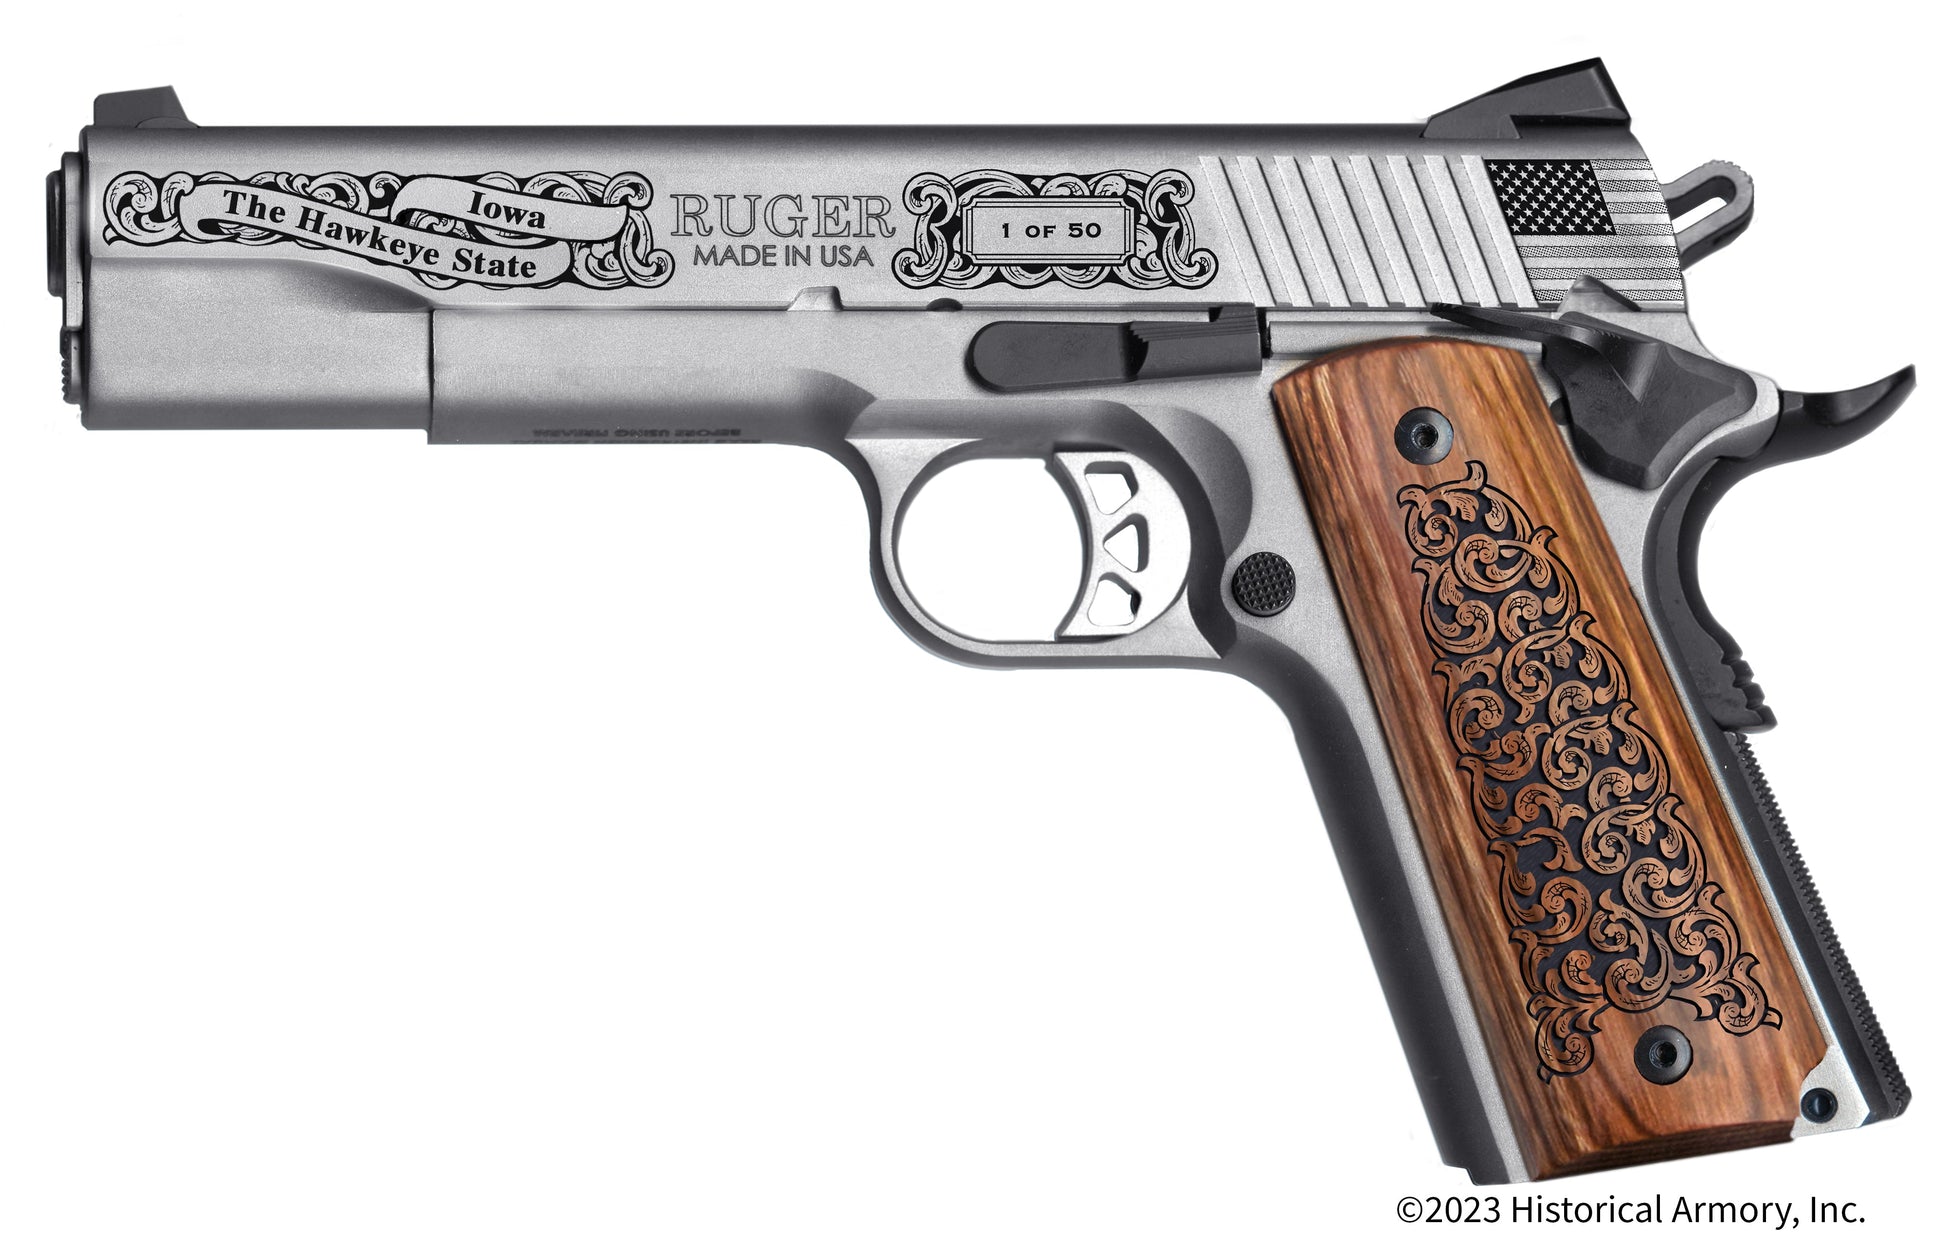 Muscatine County Iowa Engraved .45 Auto Ruger 1911